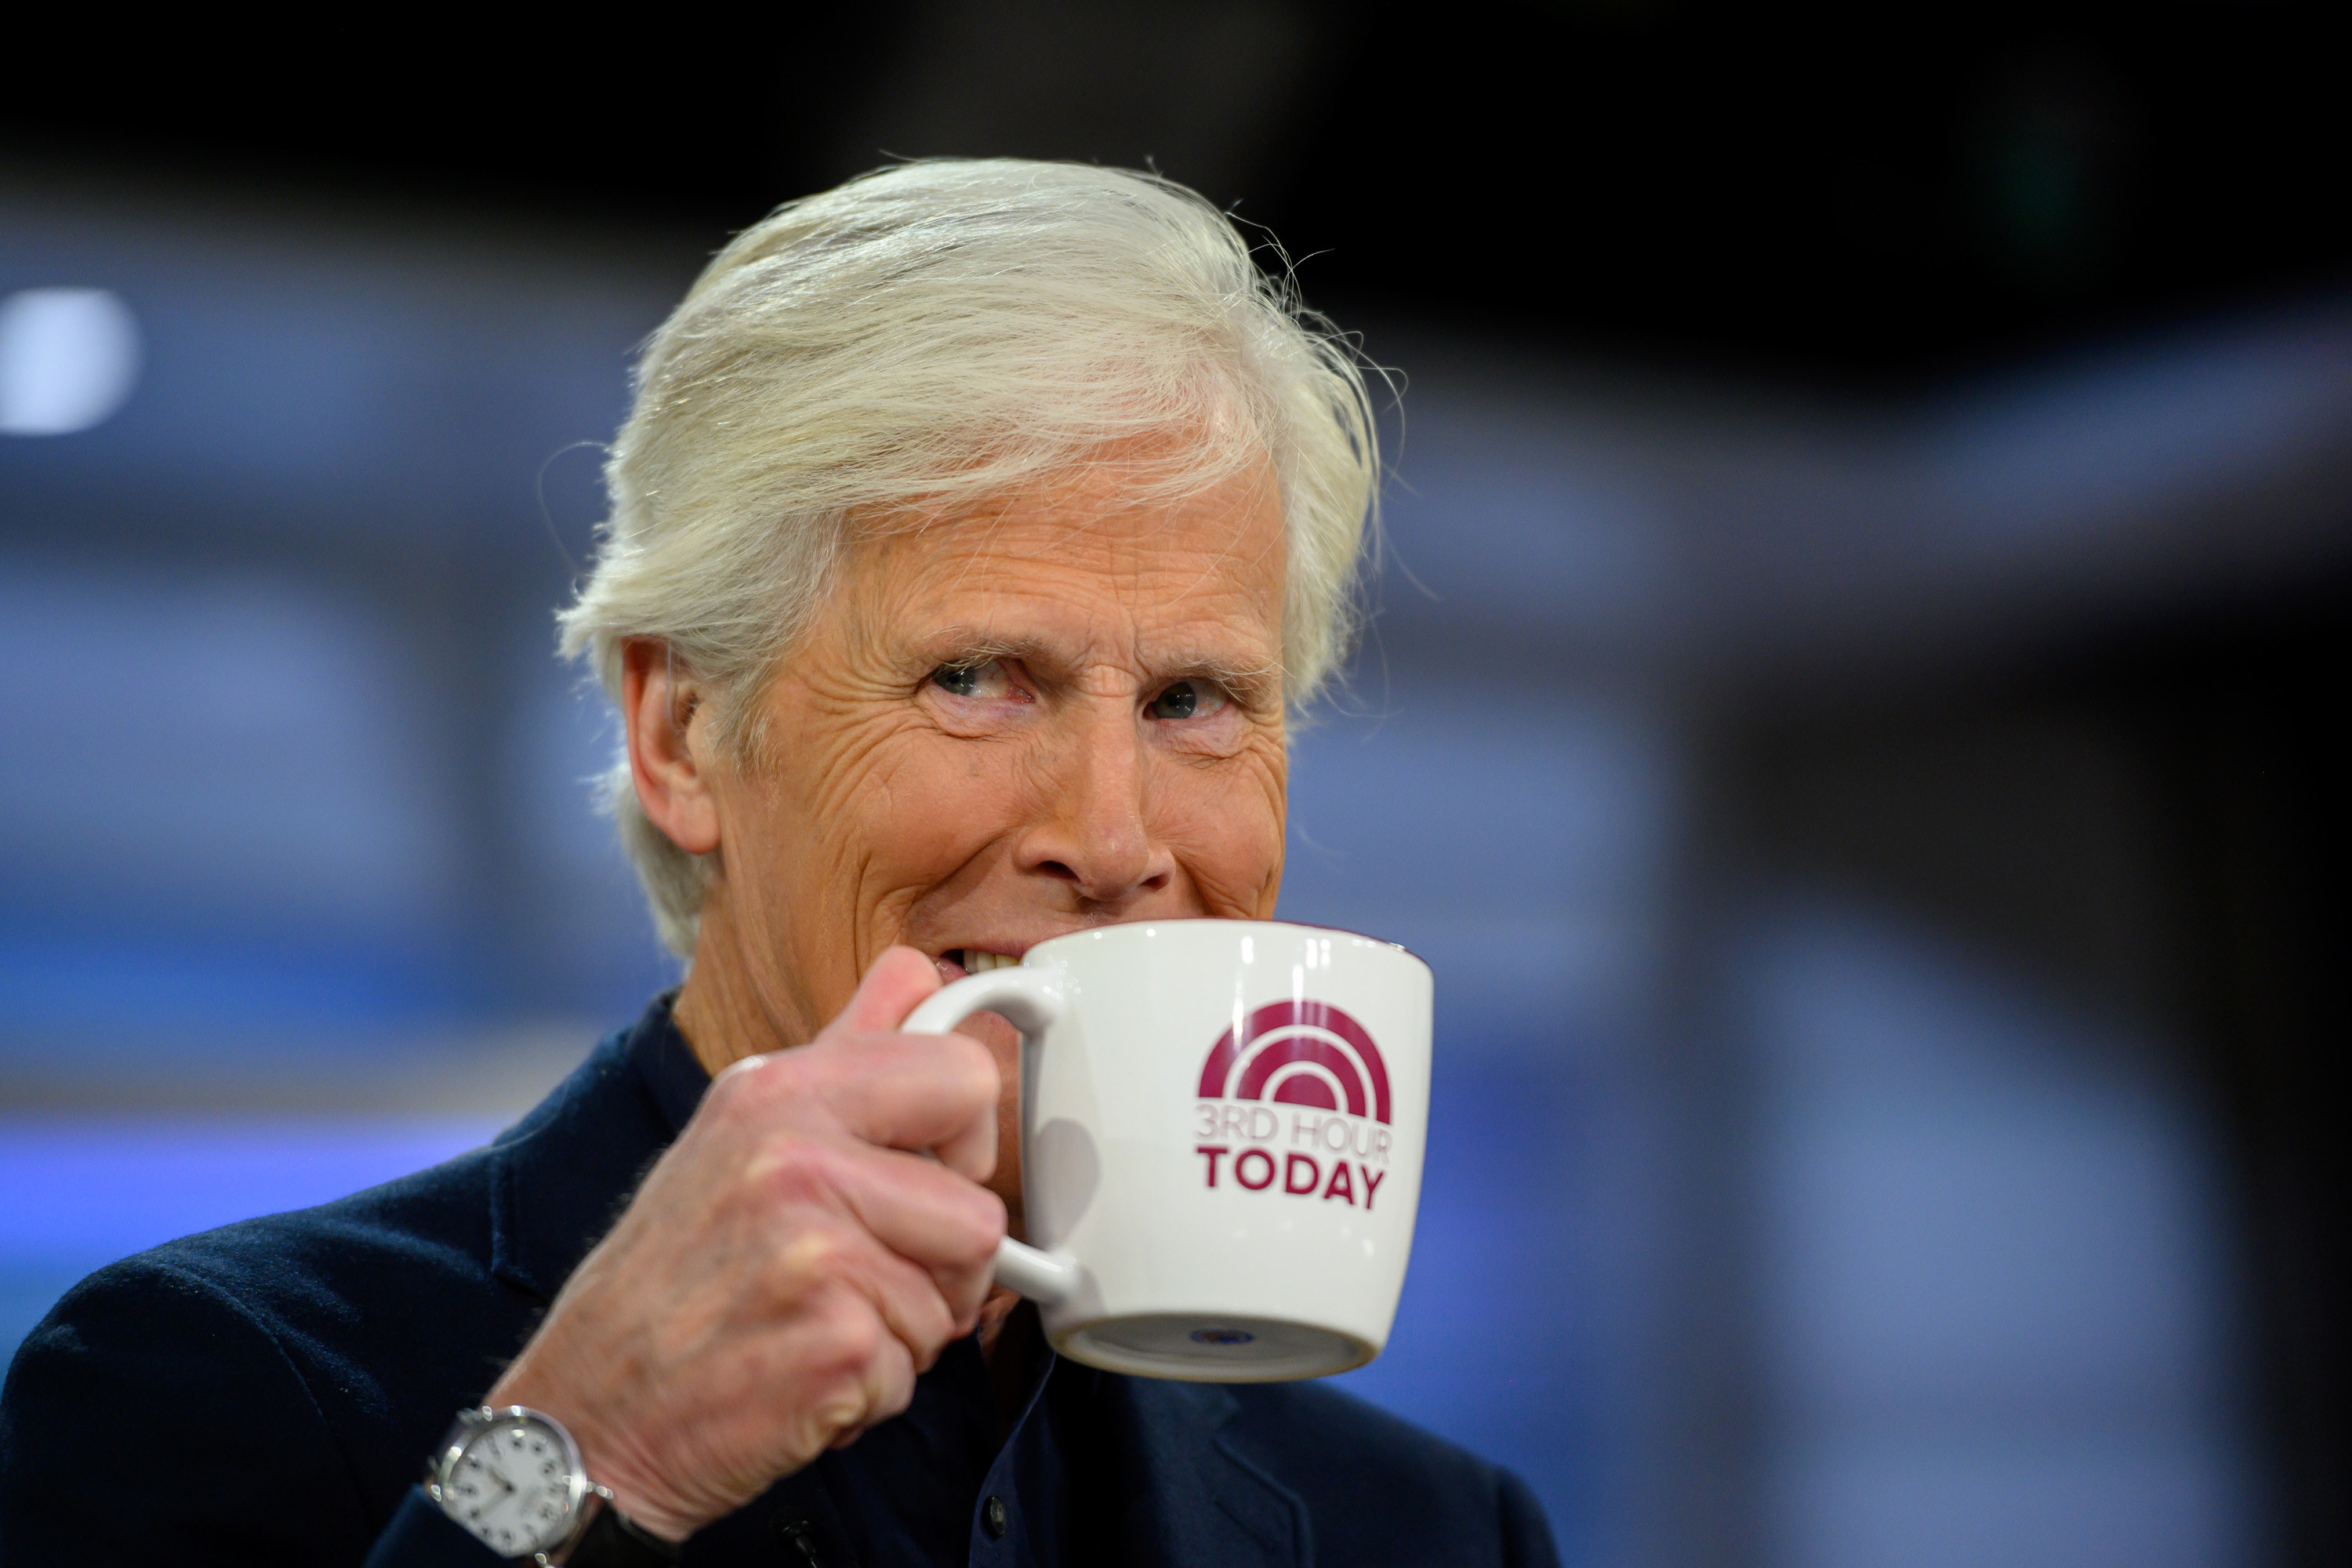 Keith Morrison grins and holds up a coffee cup on set.